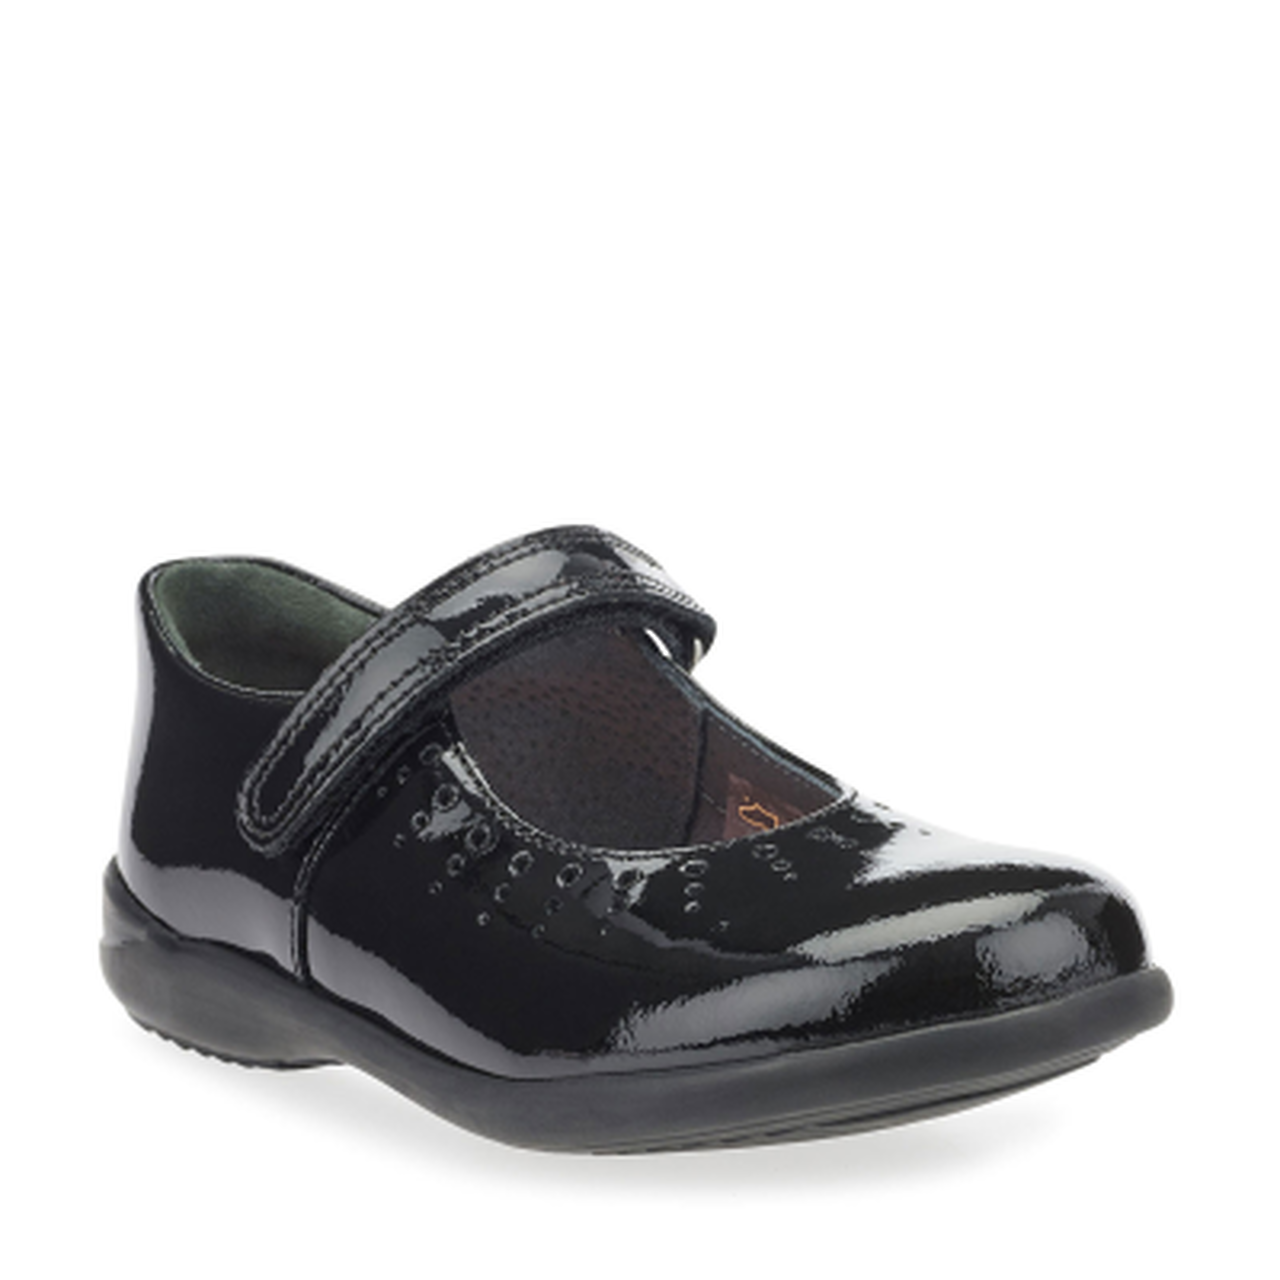 Start-rite Mary Jane Girls Black Patent Shoe - County Shoes Dorchester